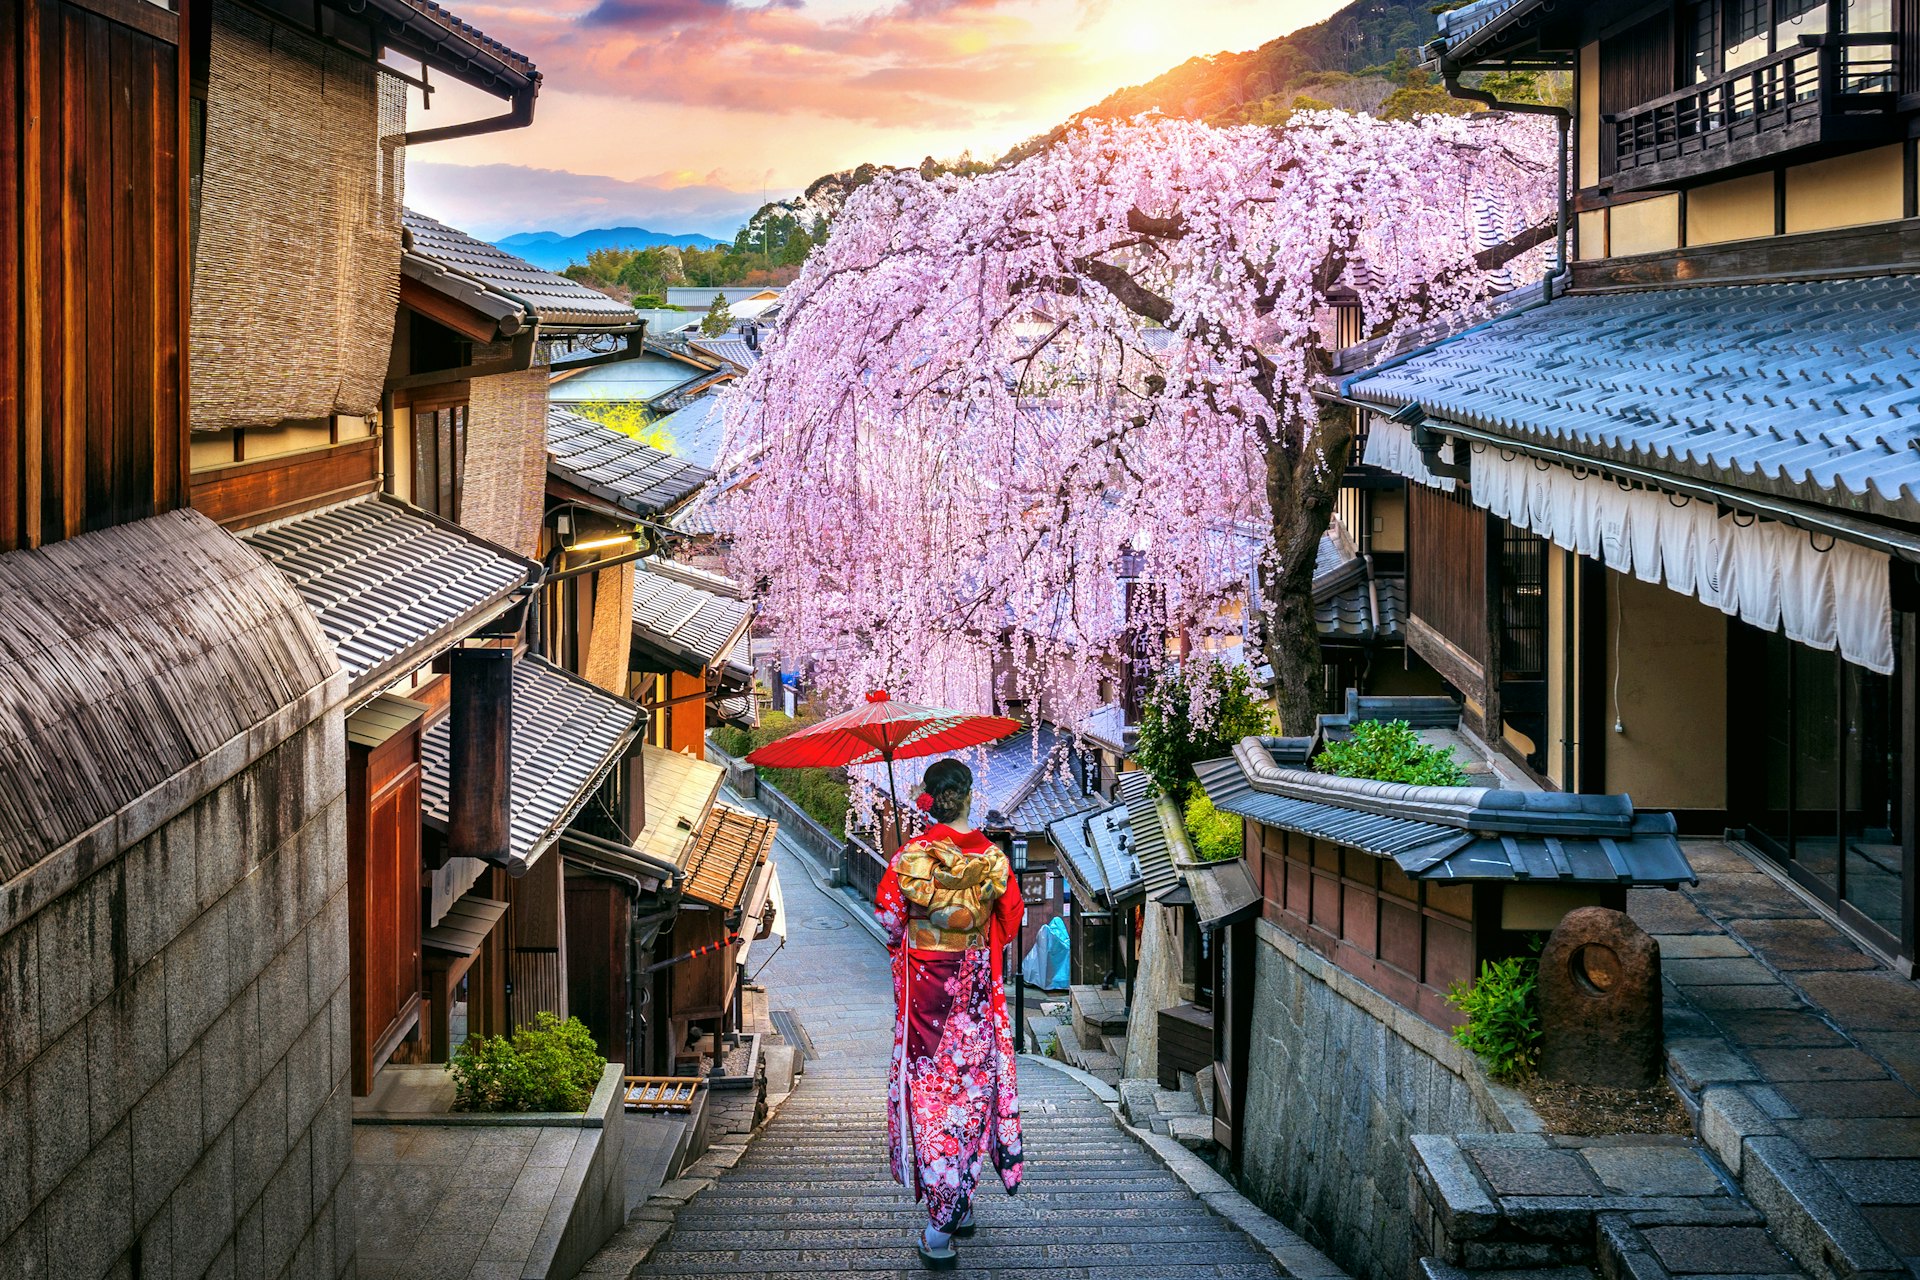 A woman in traditional Japanese dress carrying a painted umbrella walks down a path between historic wooden houses